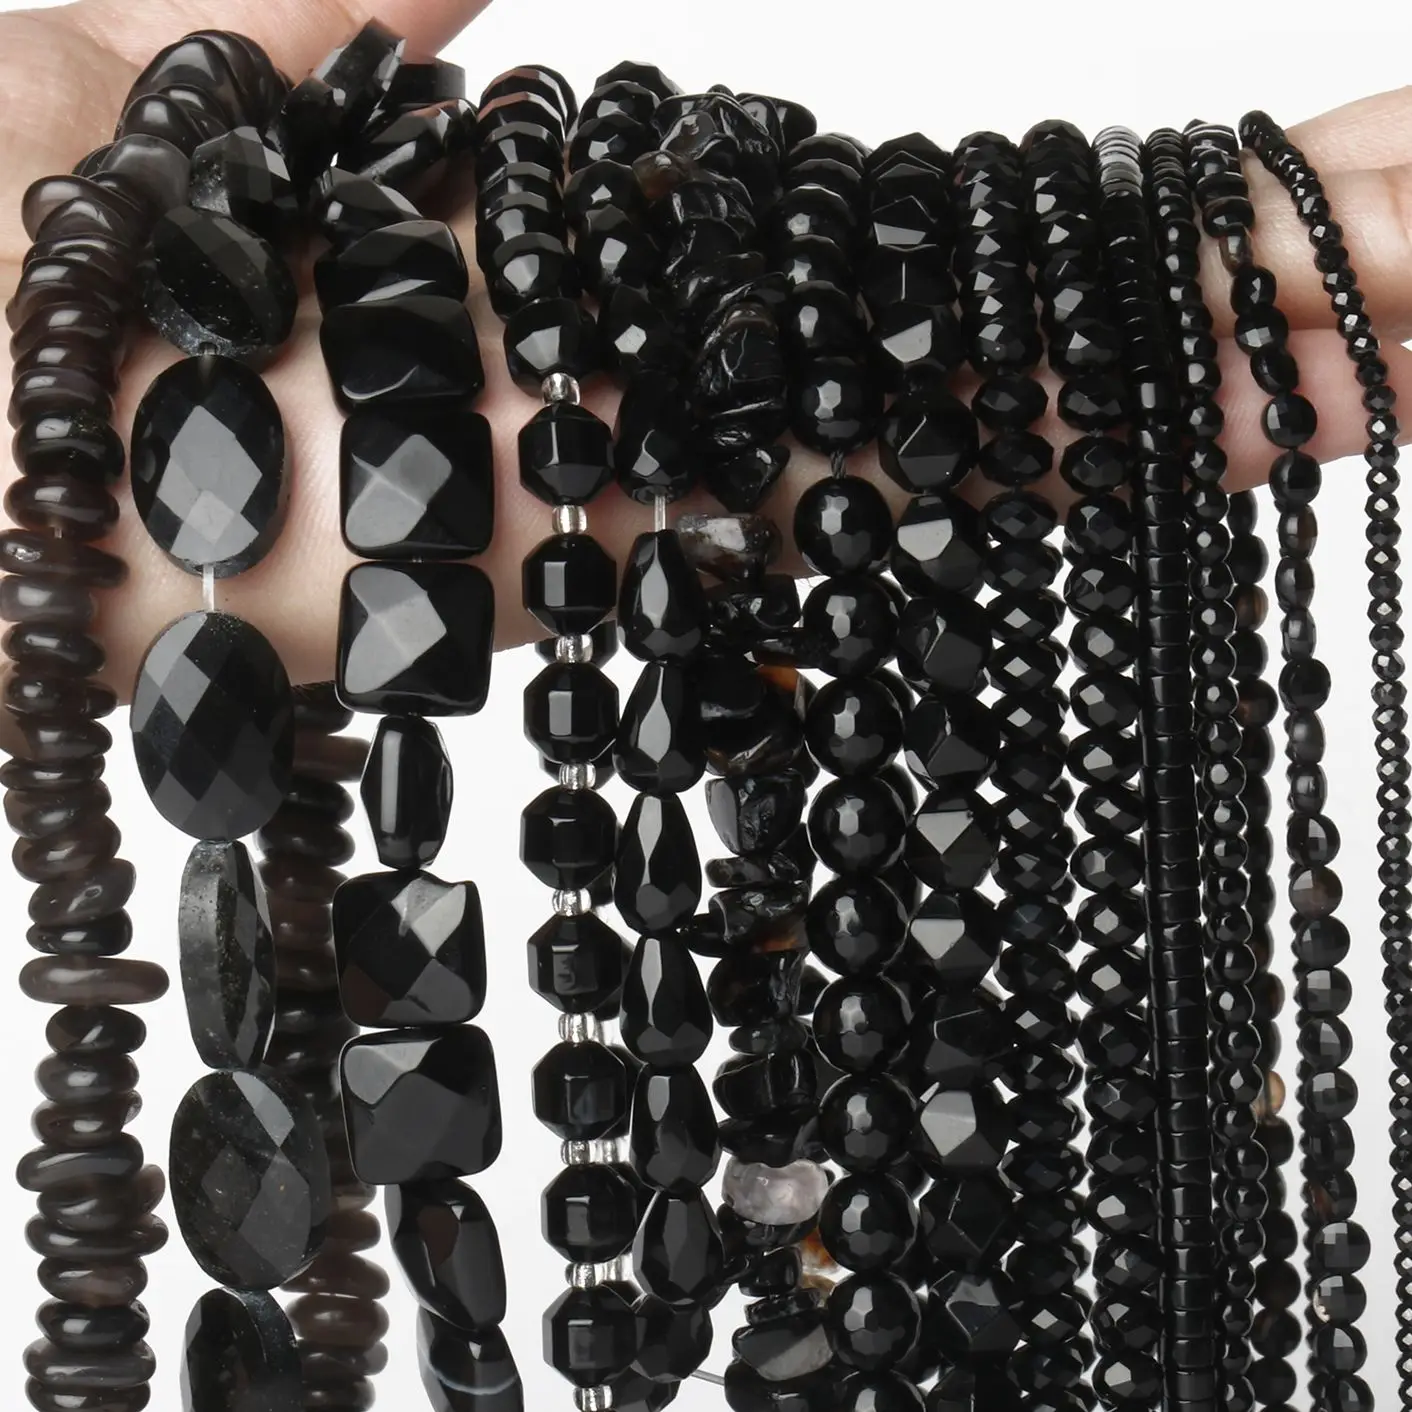 

Natural Black Onyx Agates Stone Round Faceted Irregular Smooth Rondelle Beads for Jewelry Making DIY Charms Bracelets Necklace